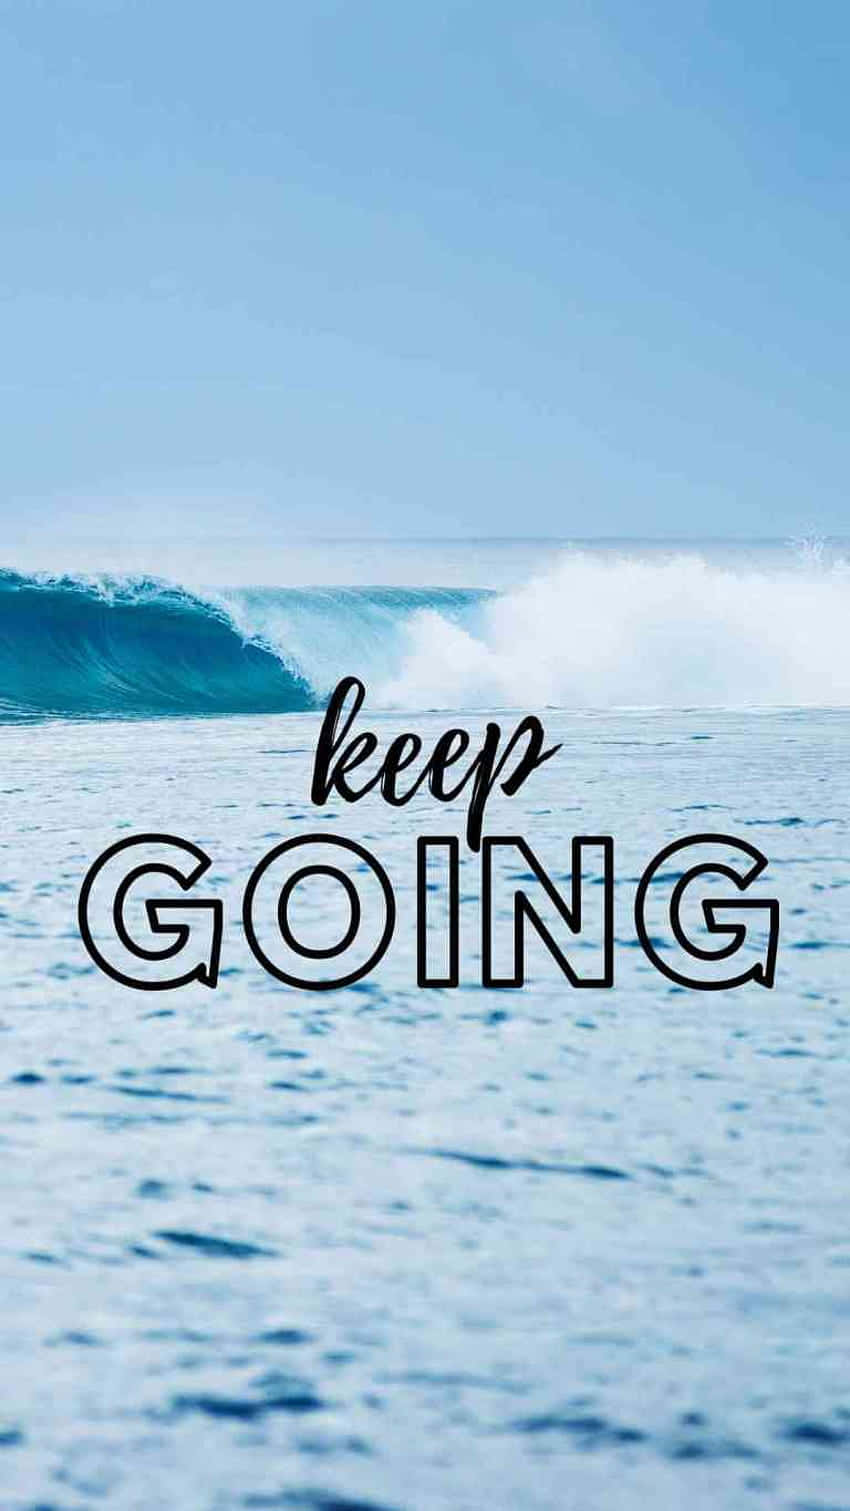 Keep Going Quotes Wallpaper